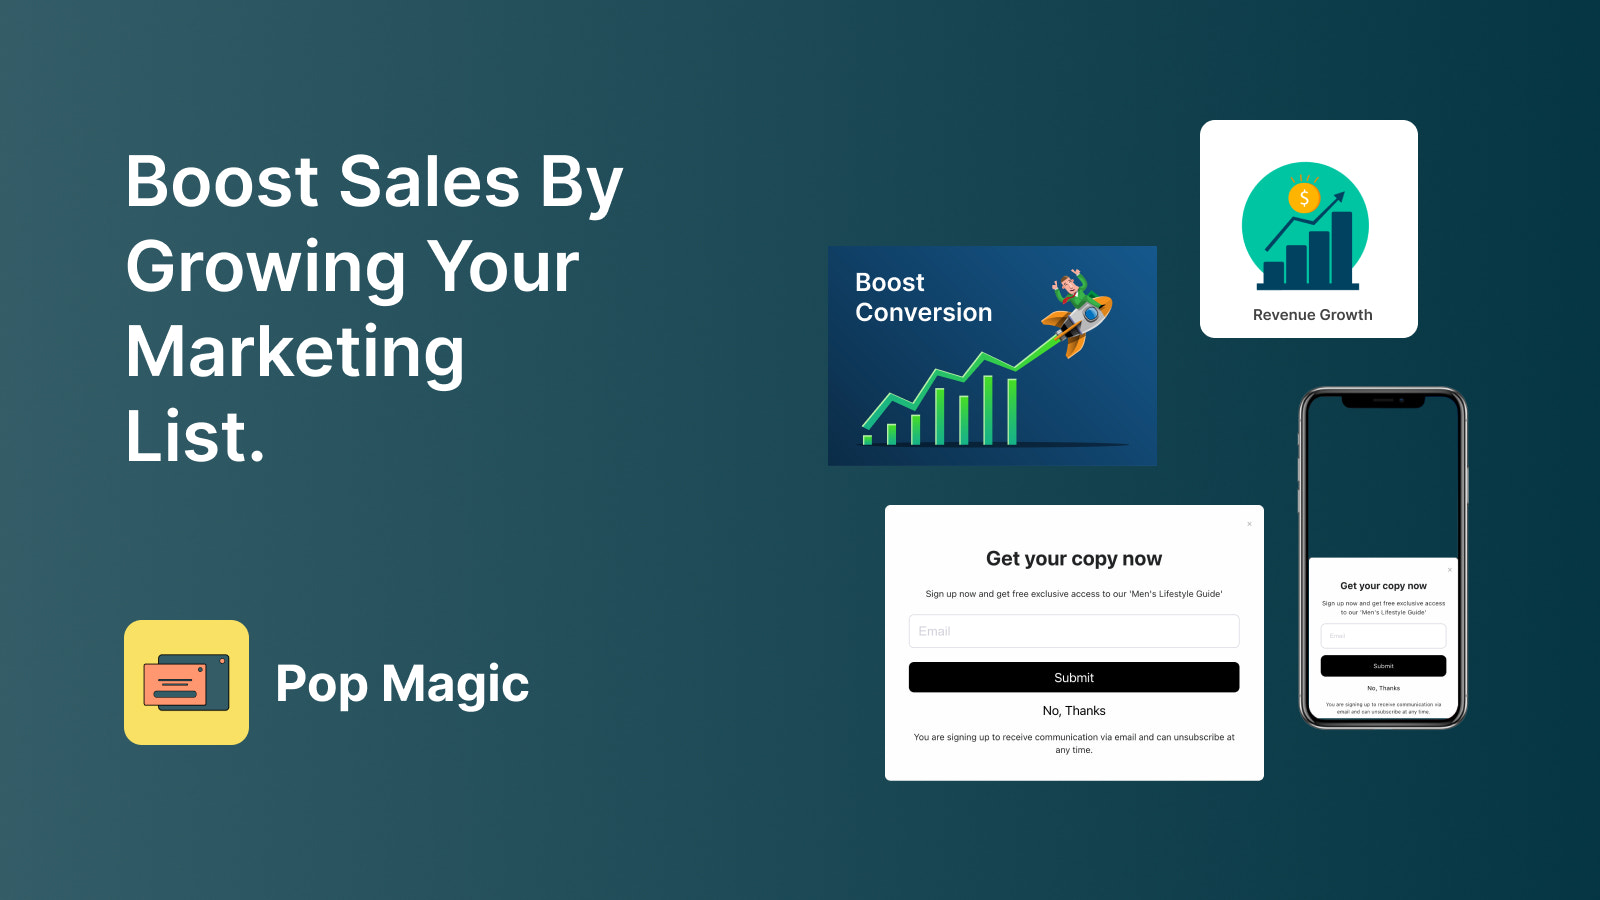 Boost Sales By Growing Your Marketing List